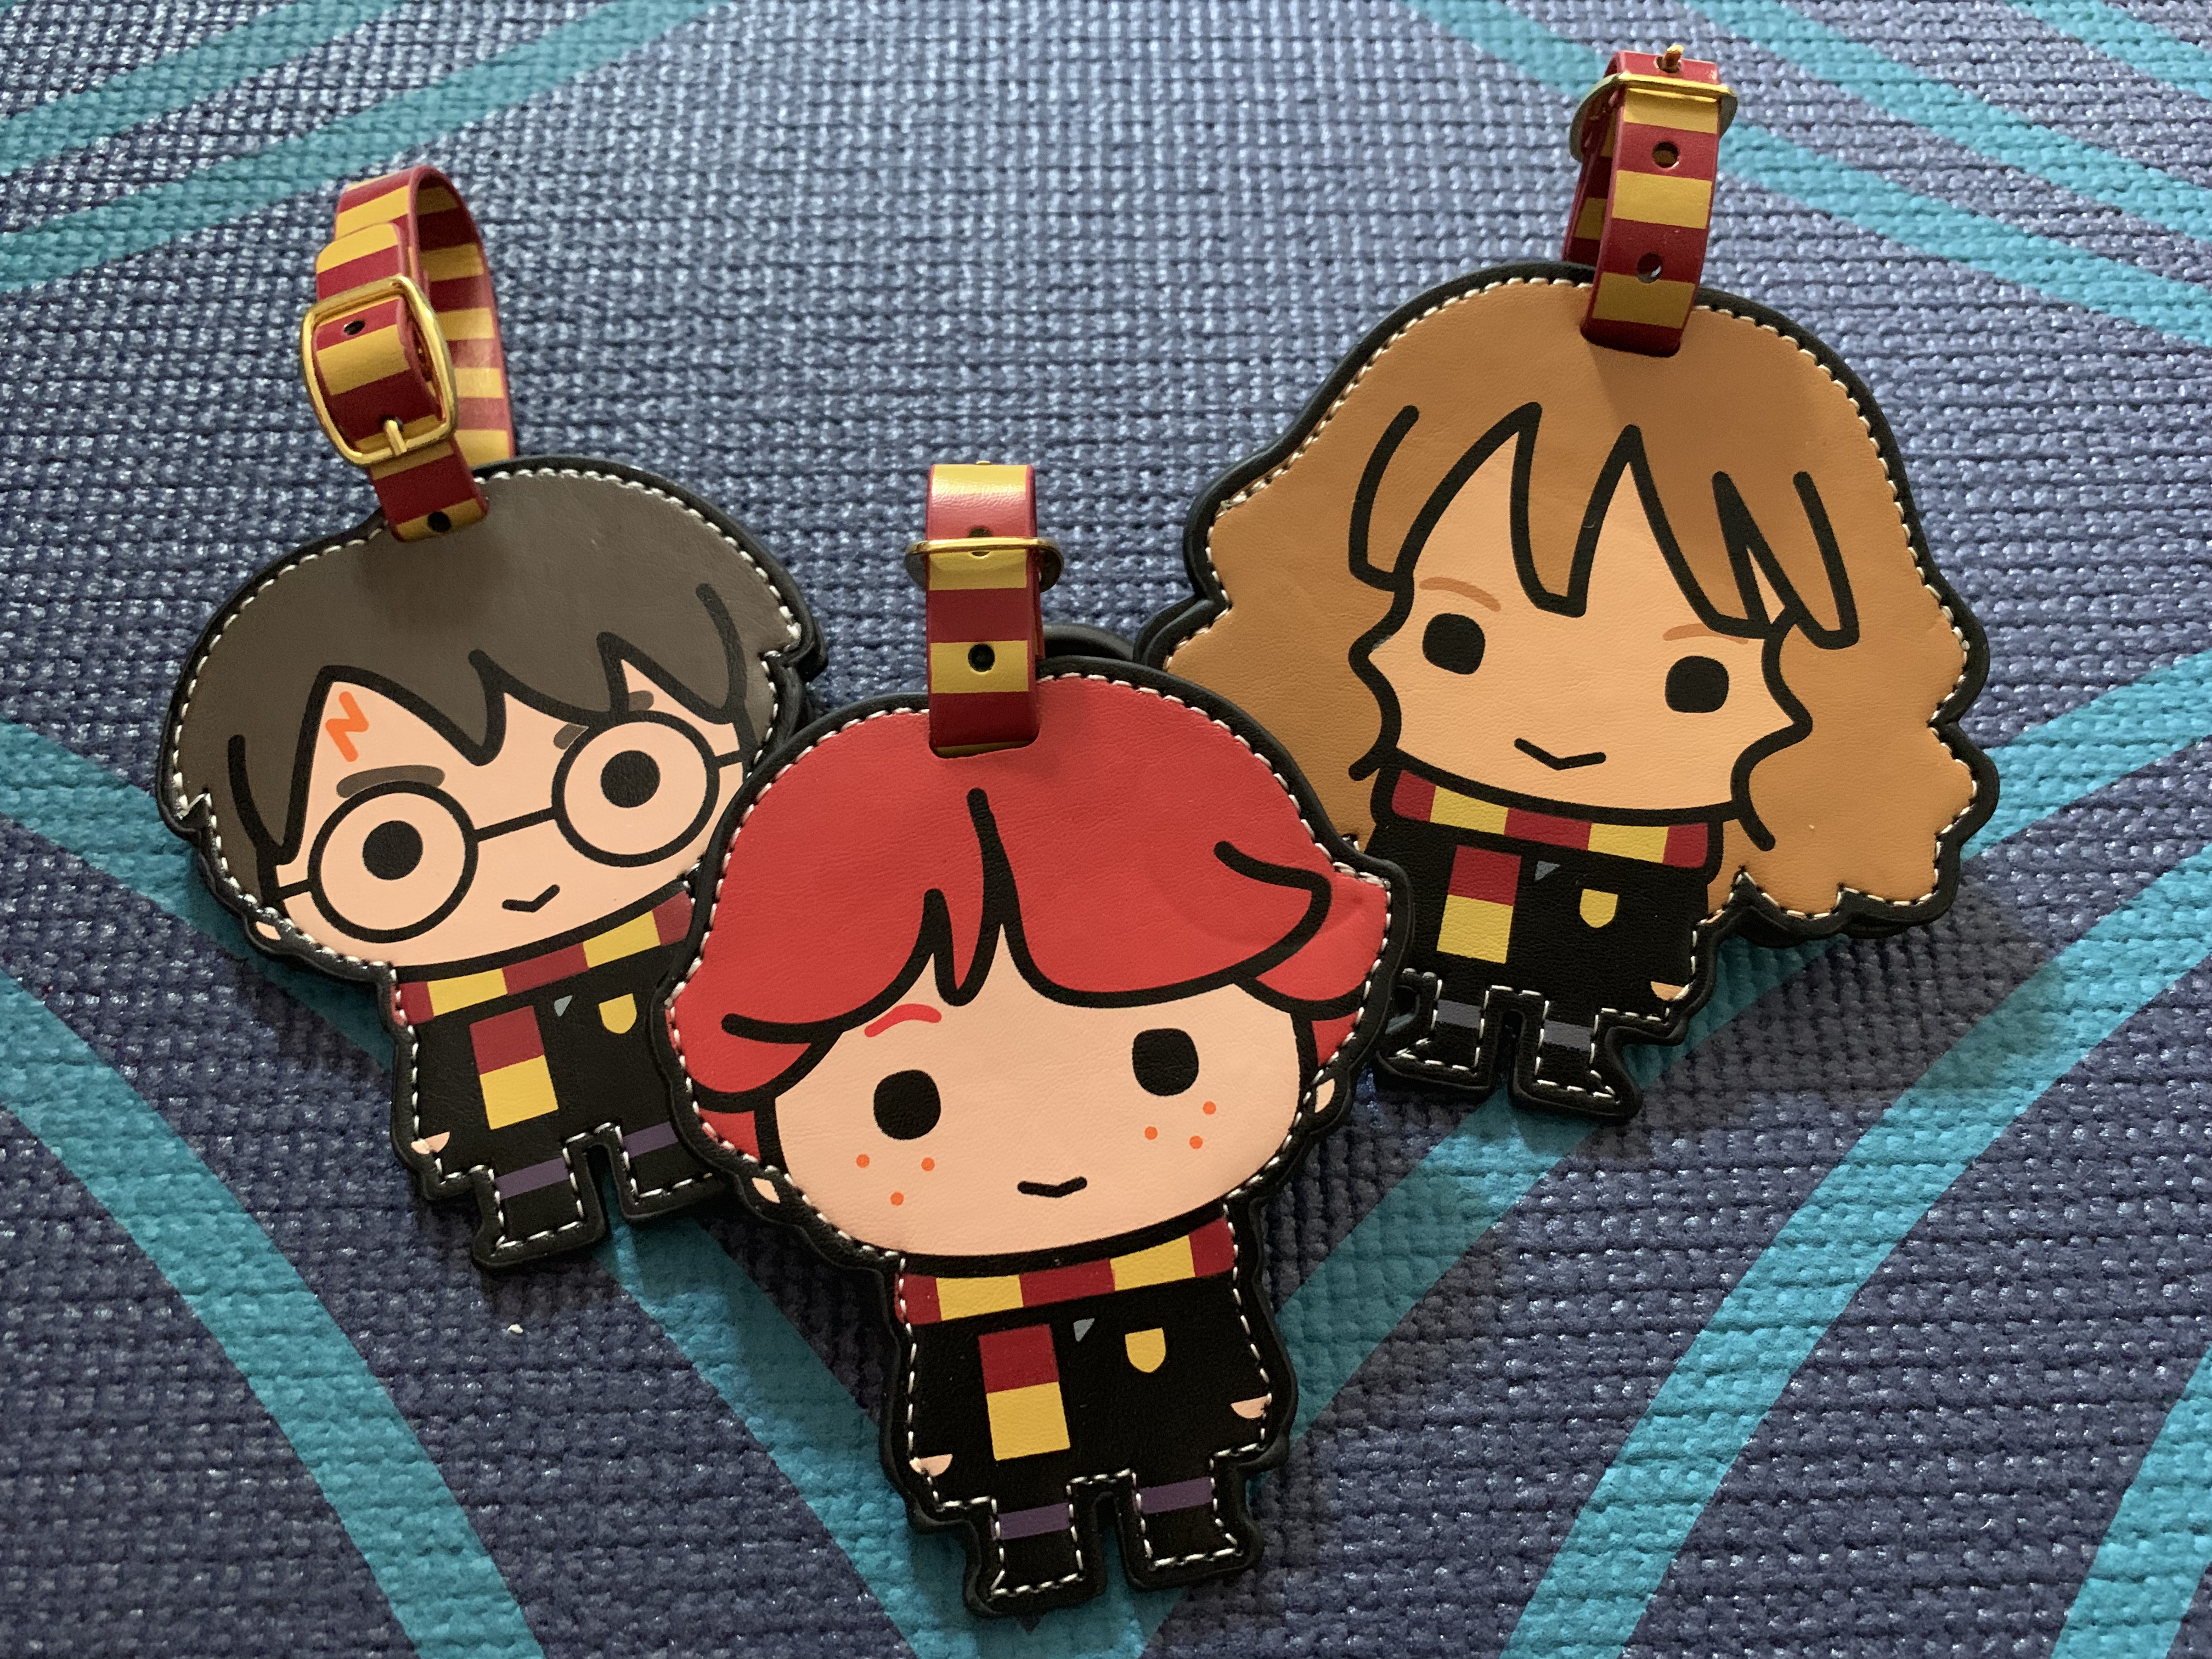 Your “Wizarding World of Harry Potter Exclusive Vacation Package” will include one set of three luggage tags (Harry, Ron, and Hermione).